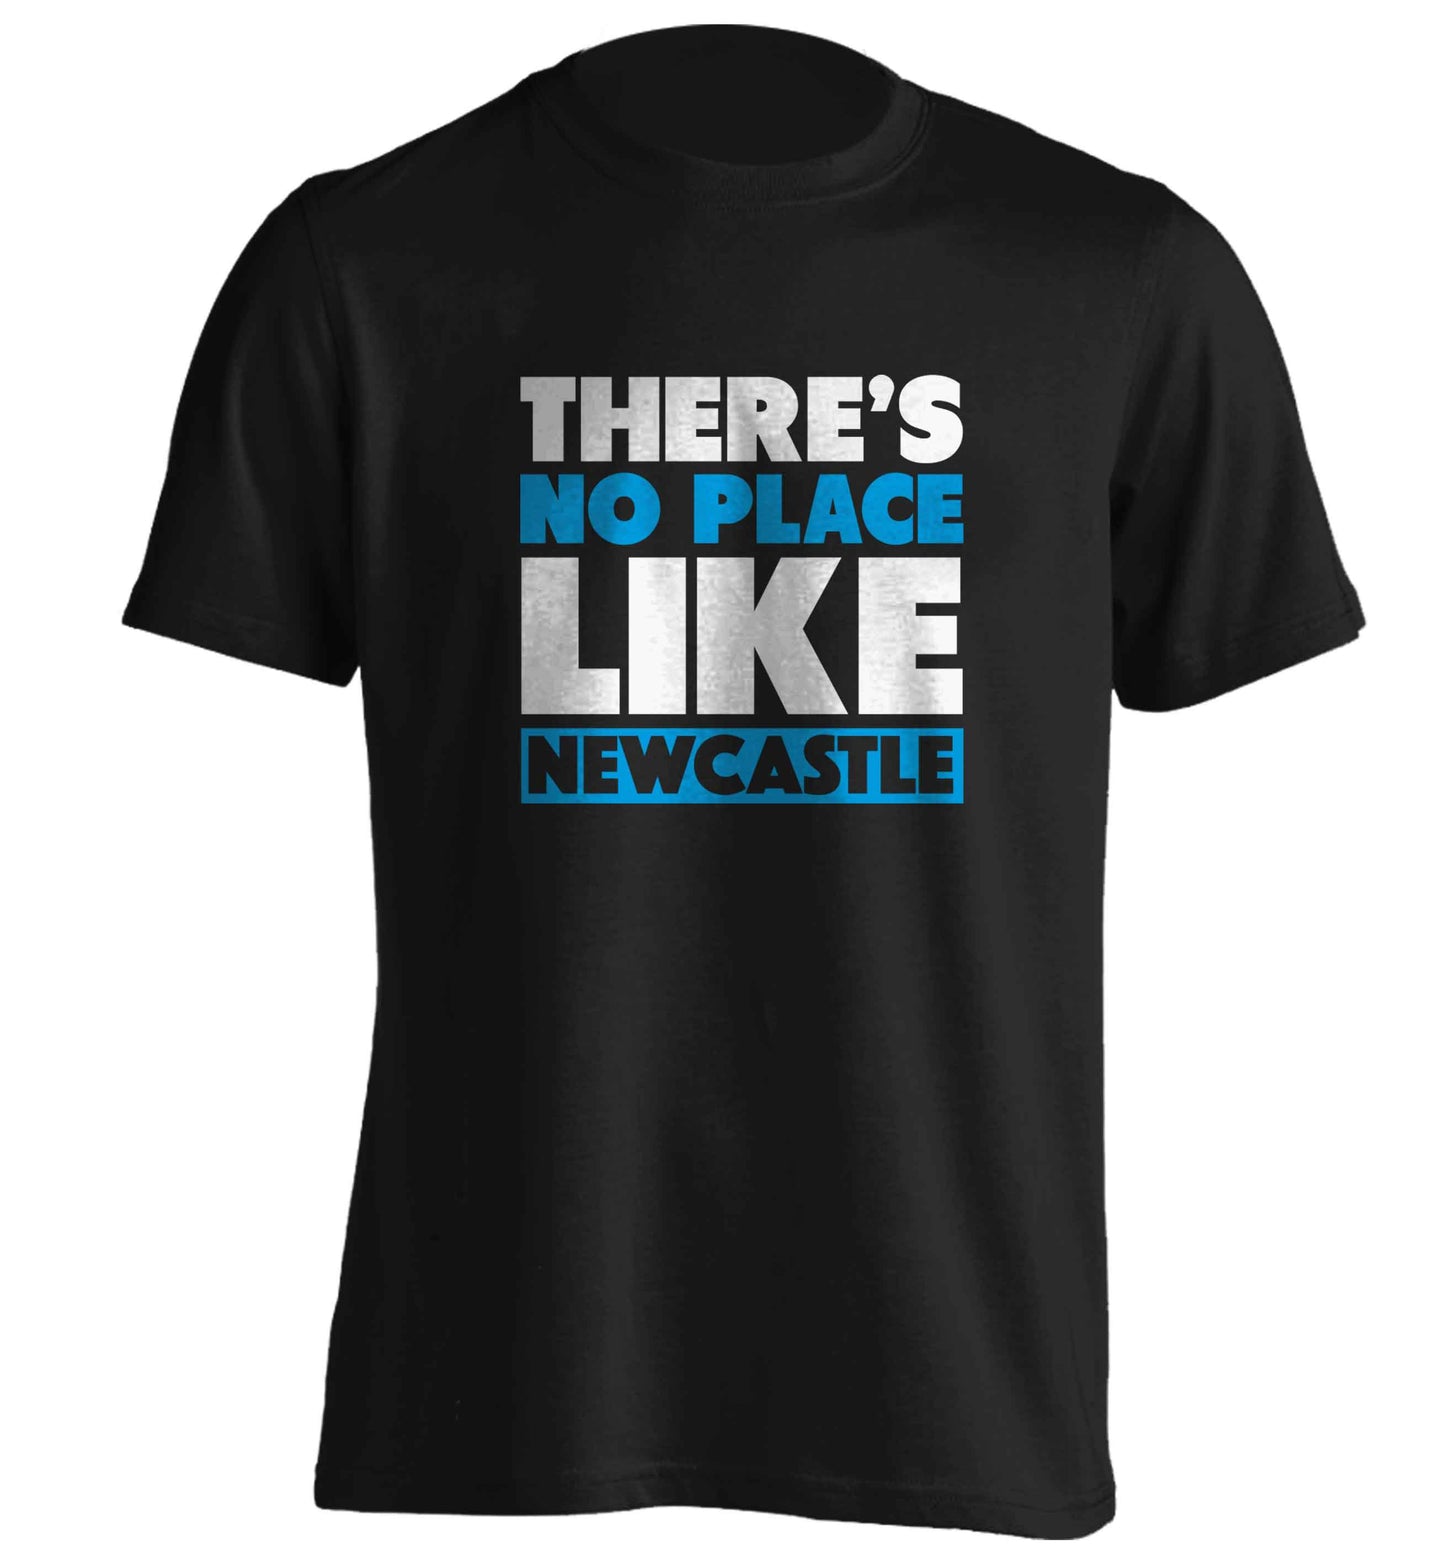 There's no place like Newcastle adults unisex black Tshirt 2XL